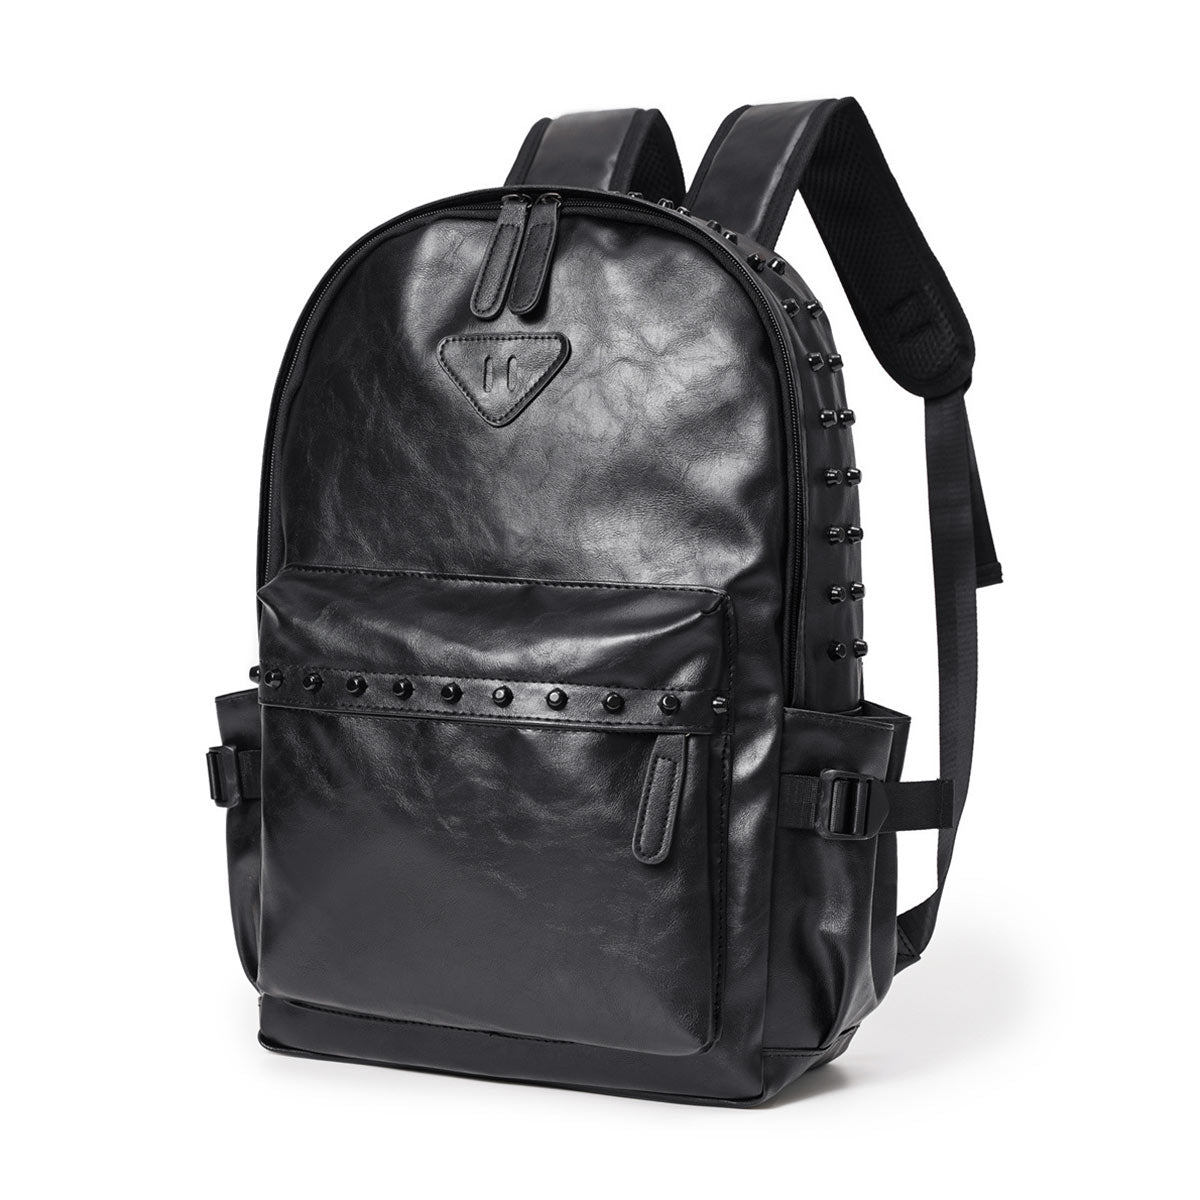 Fashionable 16-Inch Laptop Backpack - Goth Bag in Black